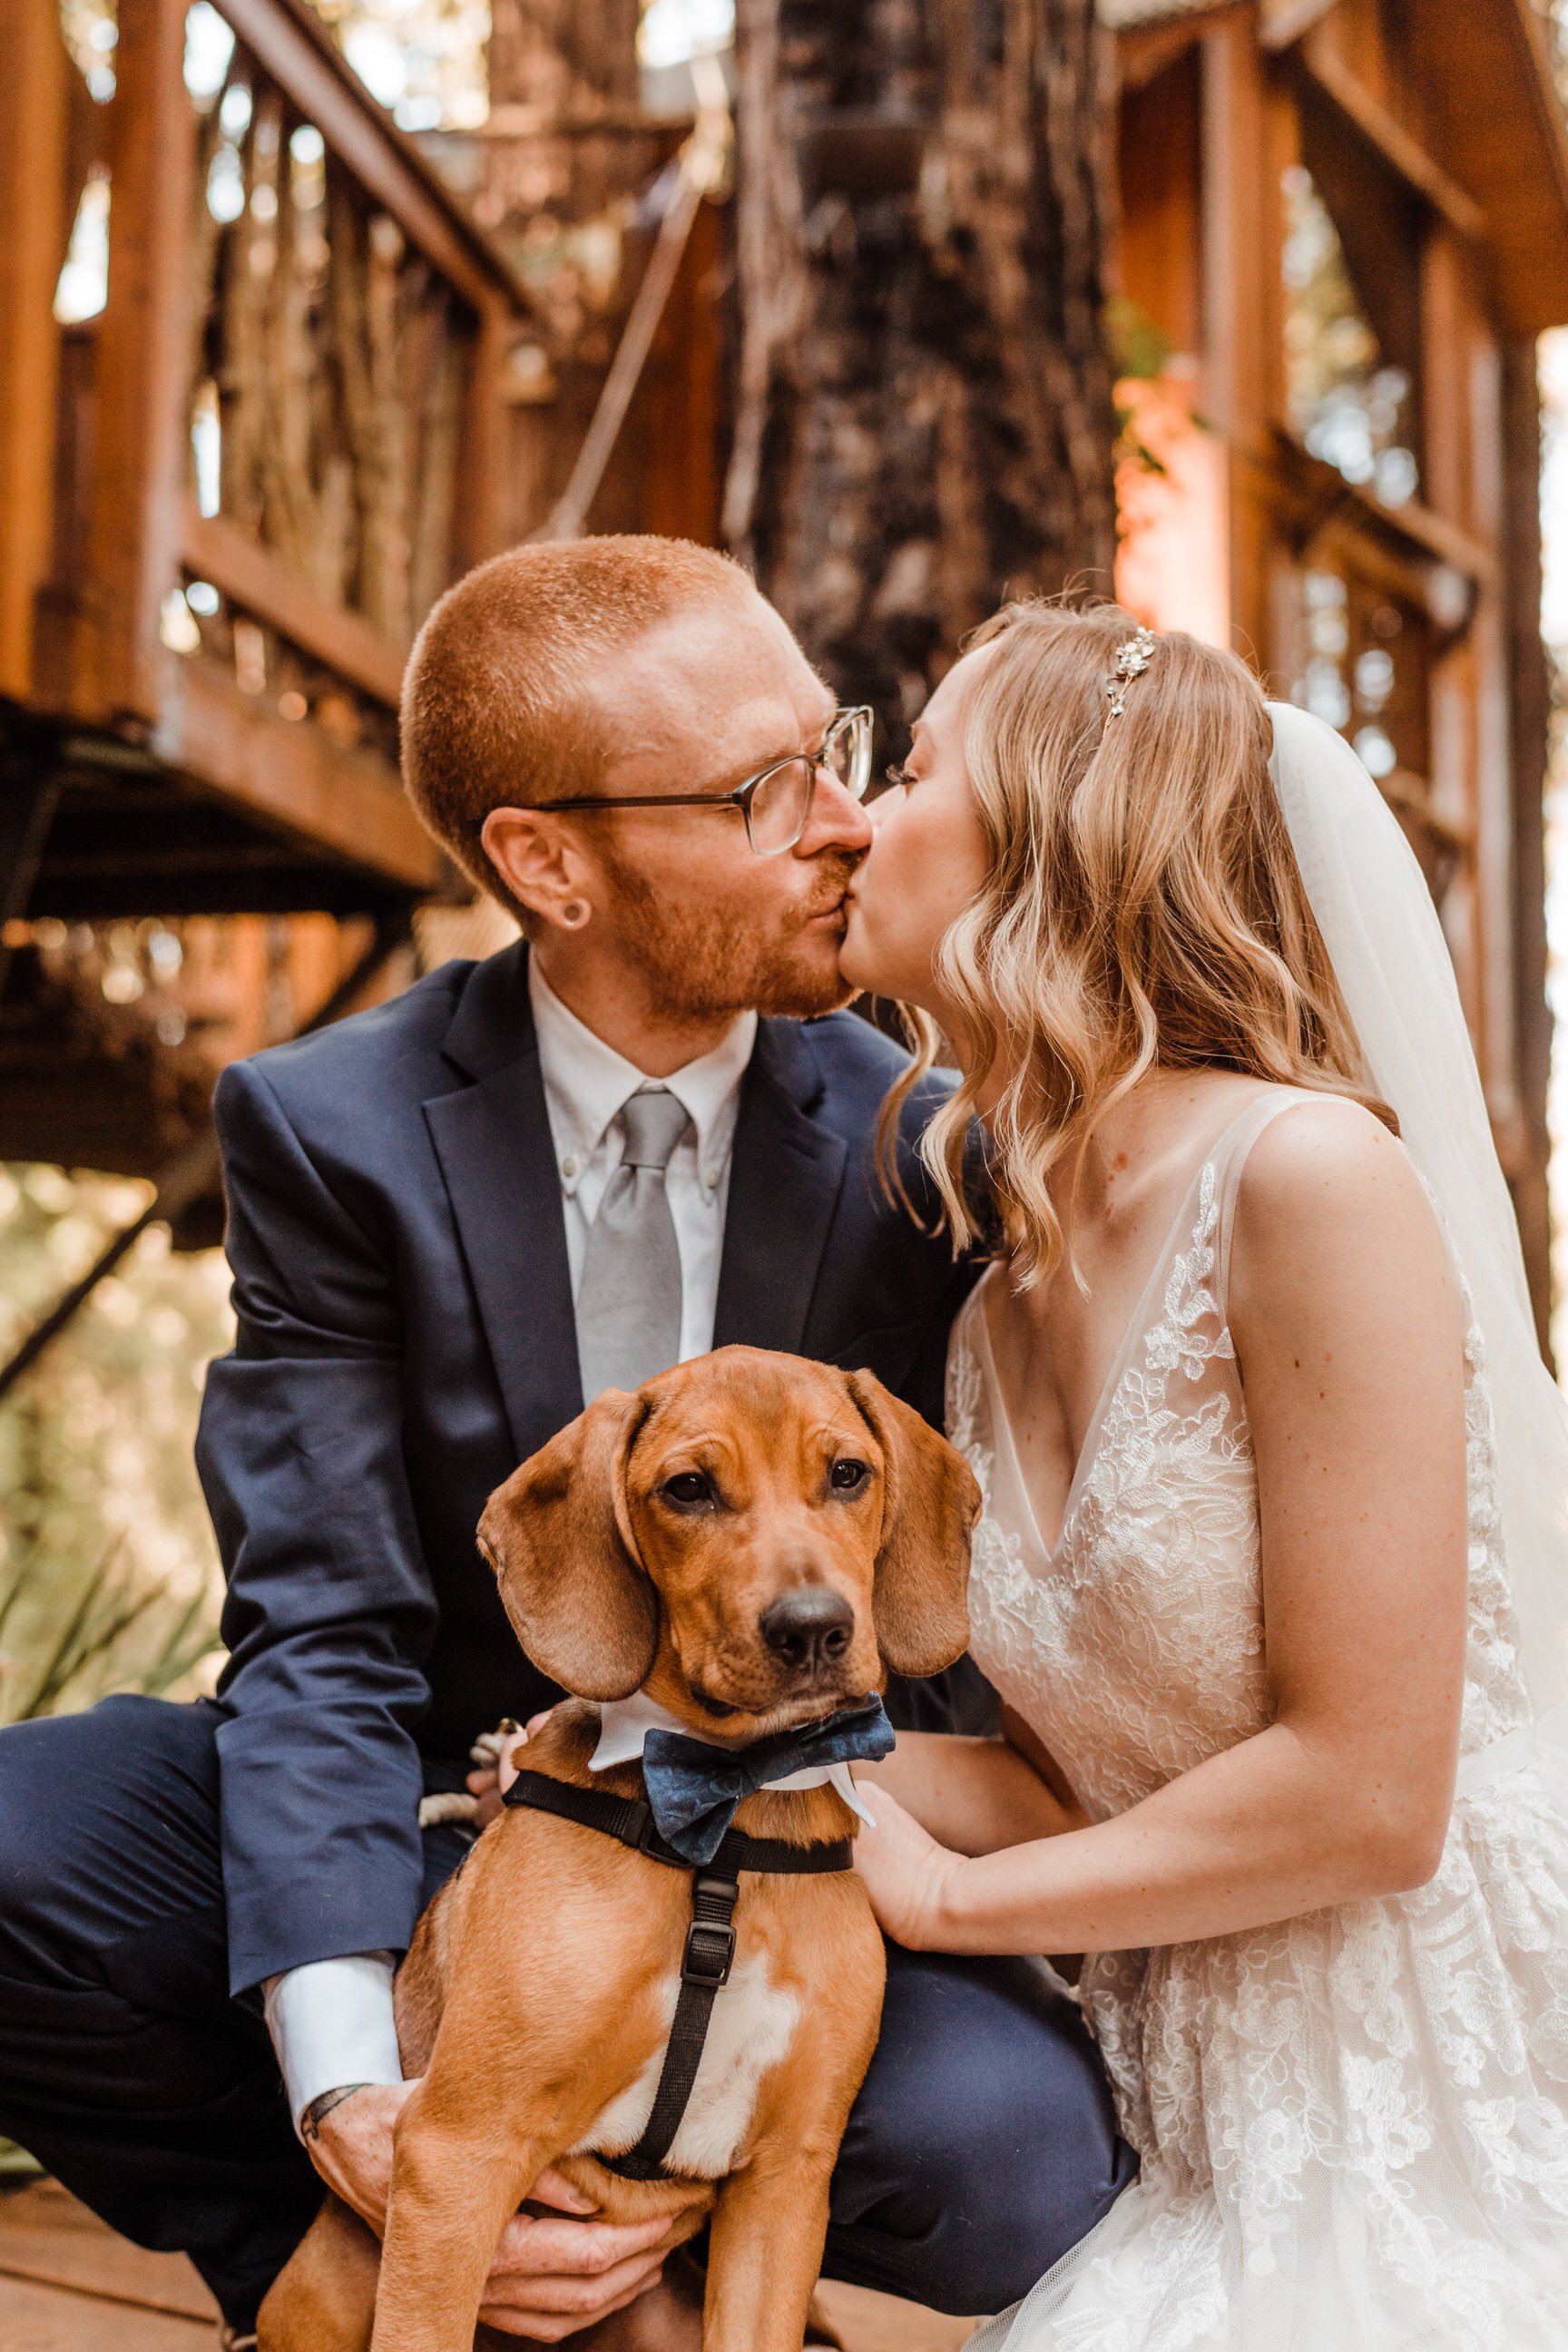 Wedding-in-the-Woods-Bride-and-Groom-Holding-Rescue-Puppy-at-Elopement-beneath-Redwood-Trees (6).jpg